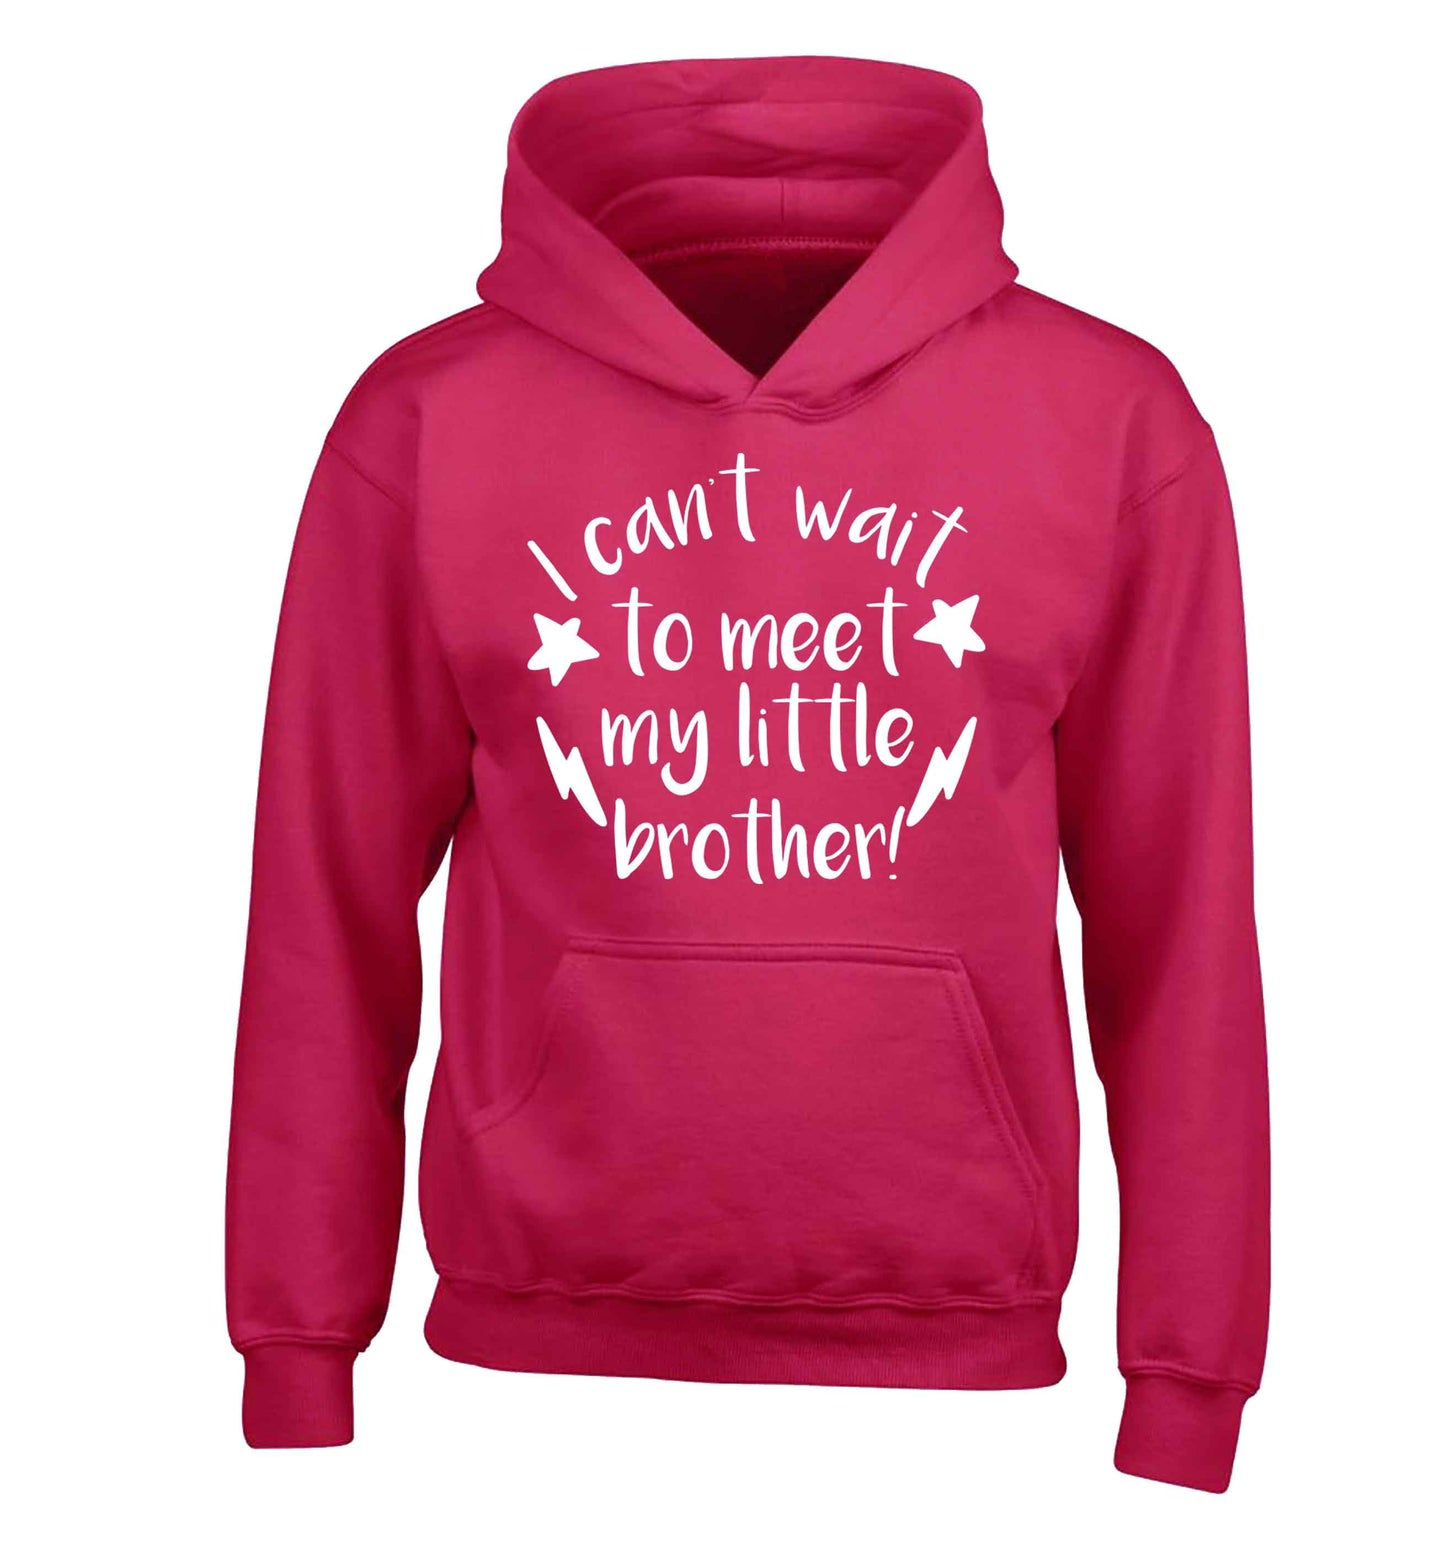 I can't wait to meet my sister! children's pink hoodie 12-13 Years